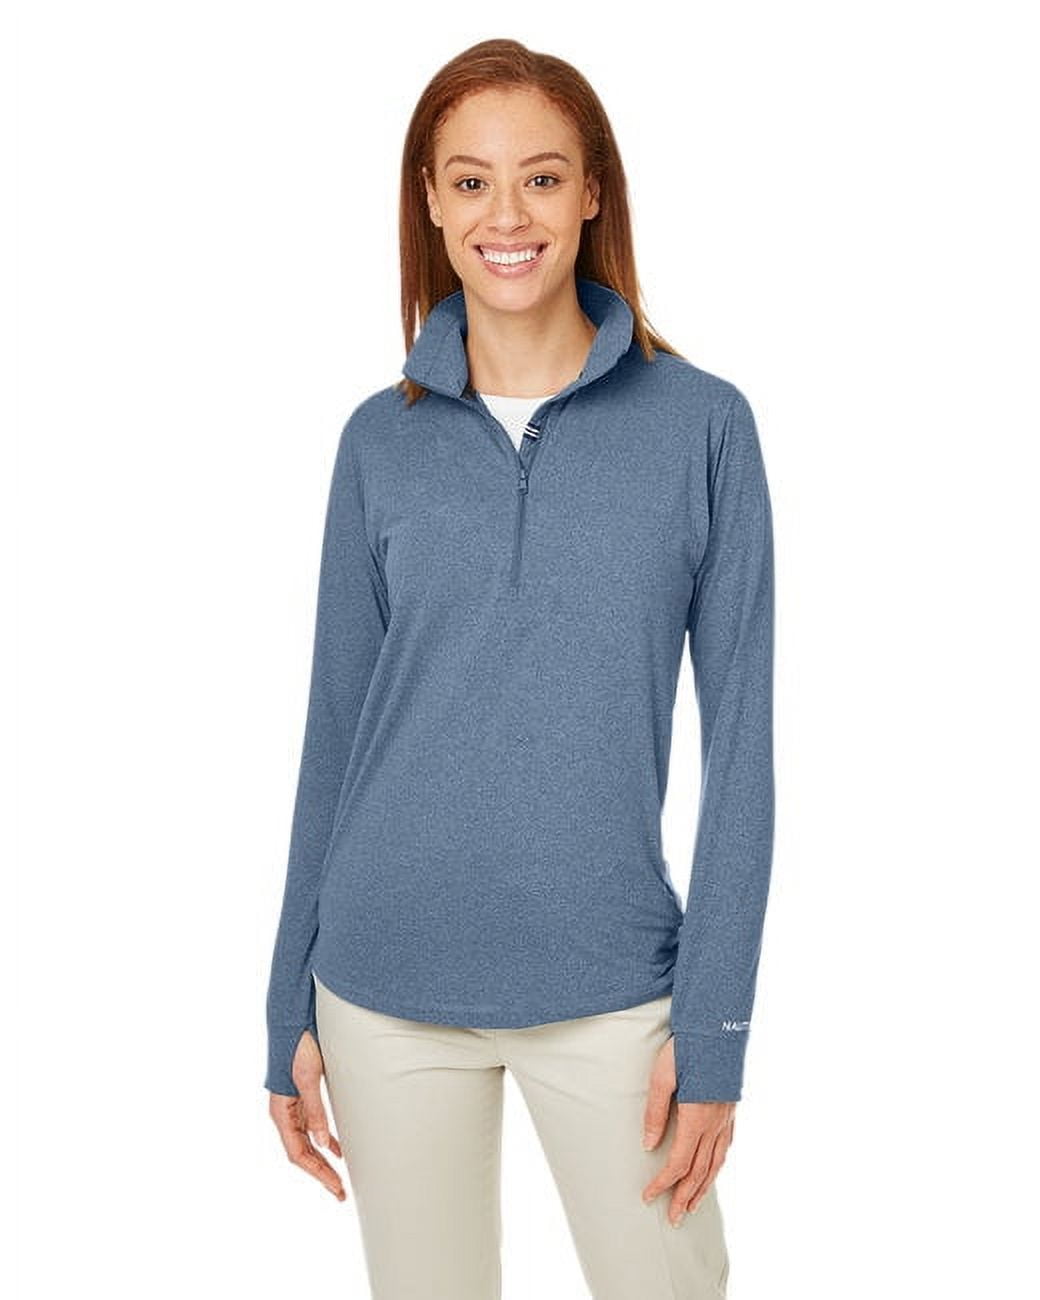 Nautica B17228103 Womens Saltwater Quarter-Zip Pullover Jacket, Faded Navy  - Small 